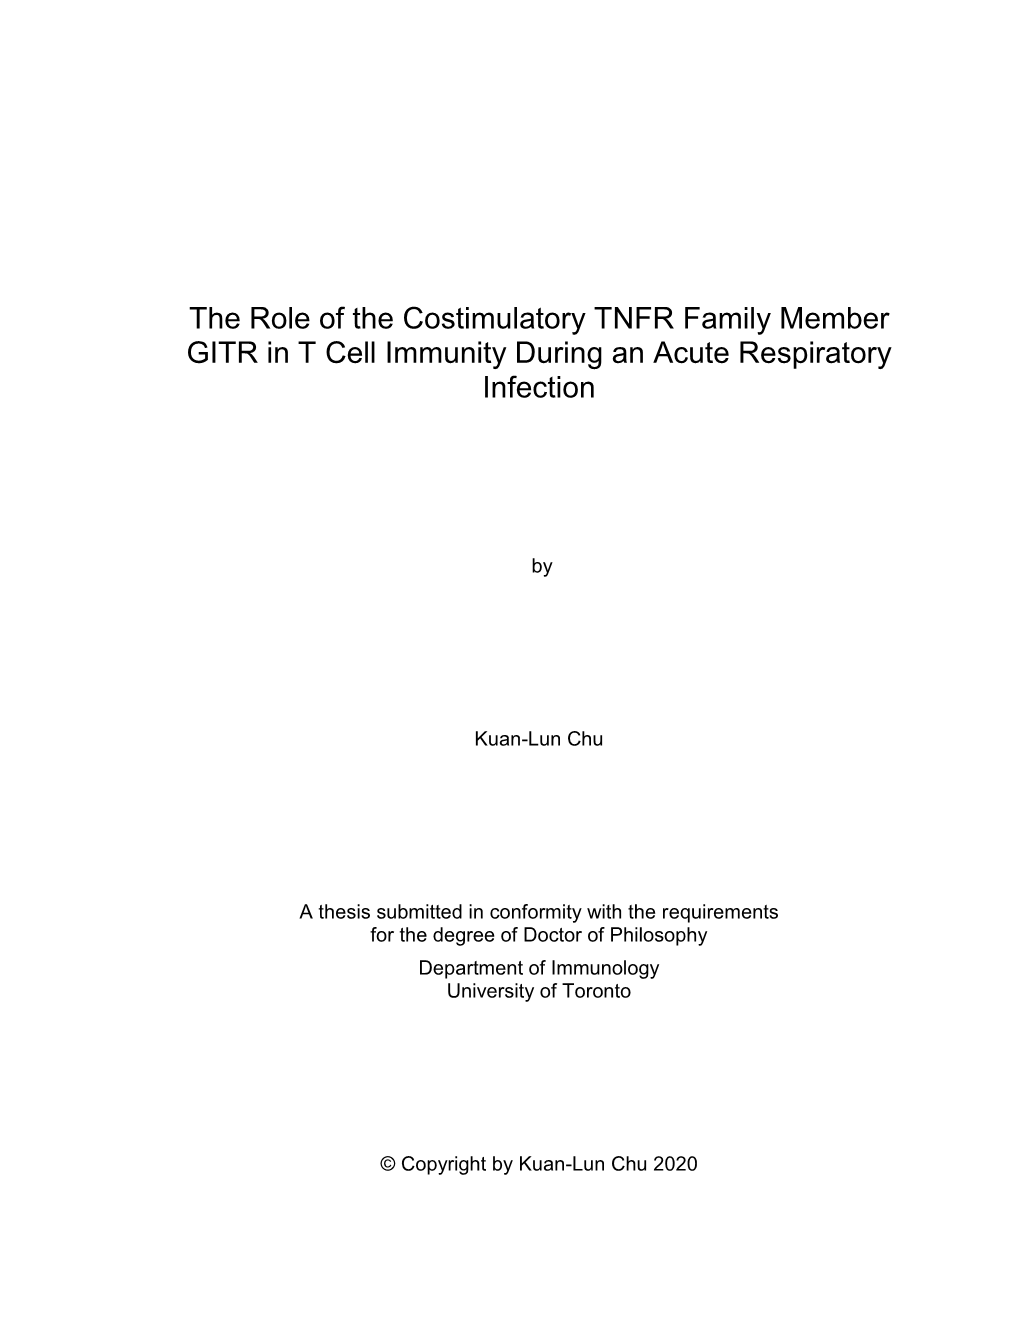 The Role of the Costimulatory TNFR Family Member GITR in T Cell Immunity During an Acute Respiratory Infection